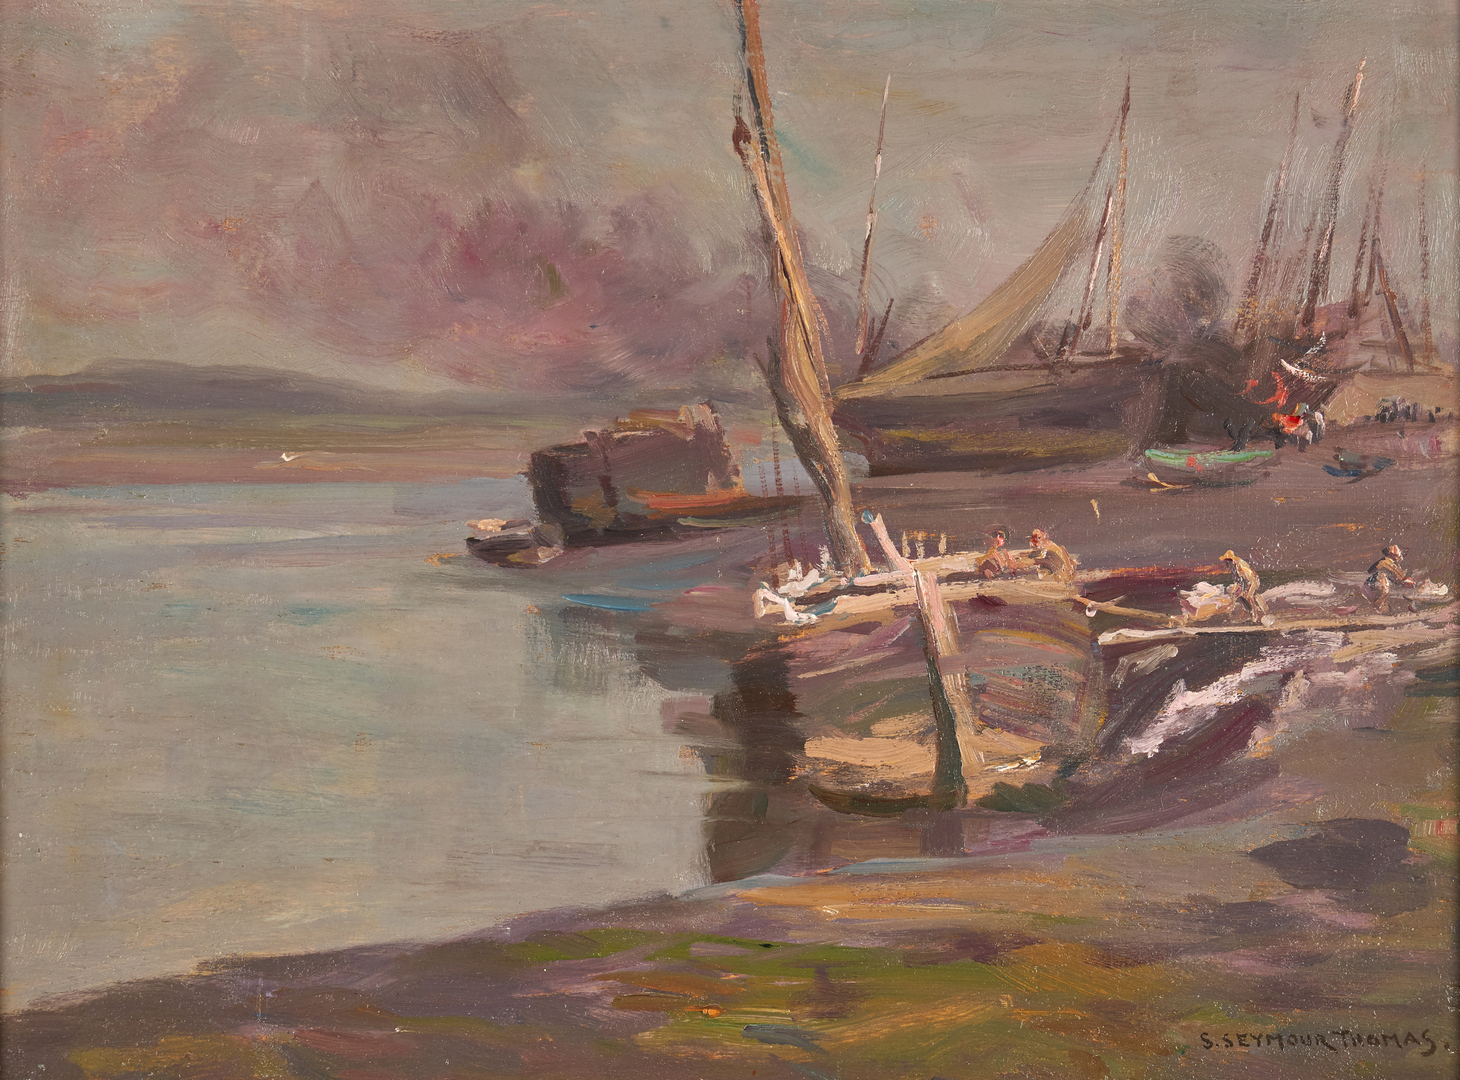 Lot 672: Stephen Seymour Thomas Oil on Panel, "Boats at Dock"